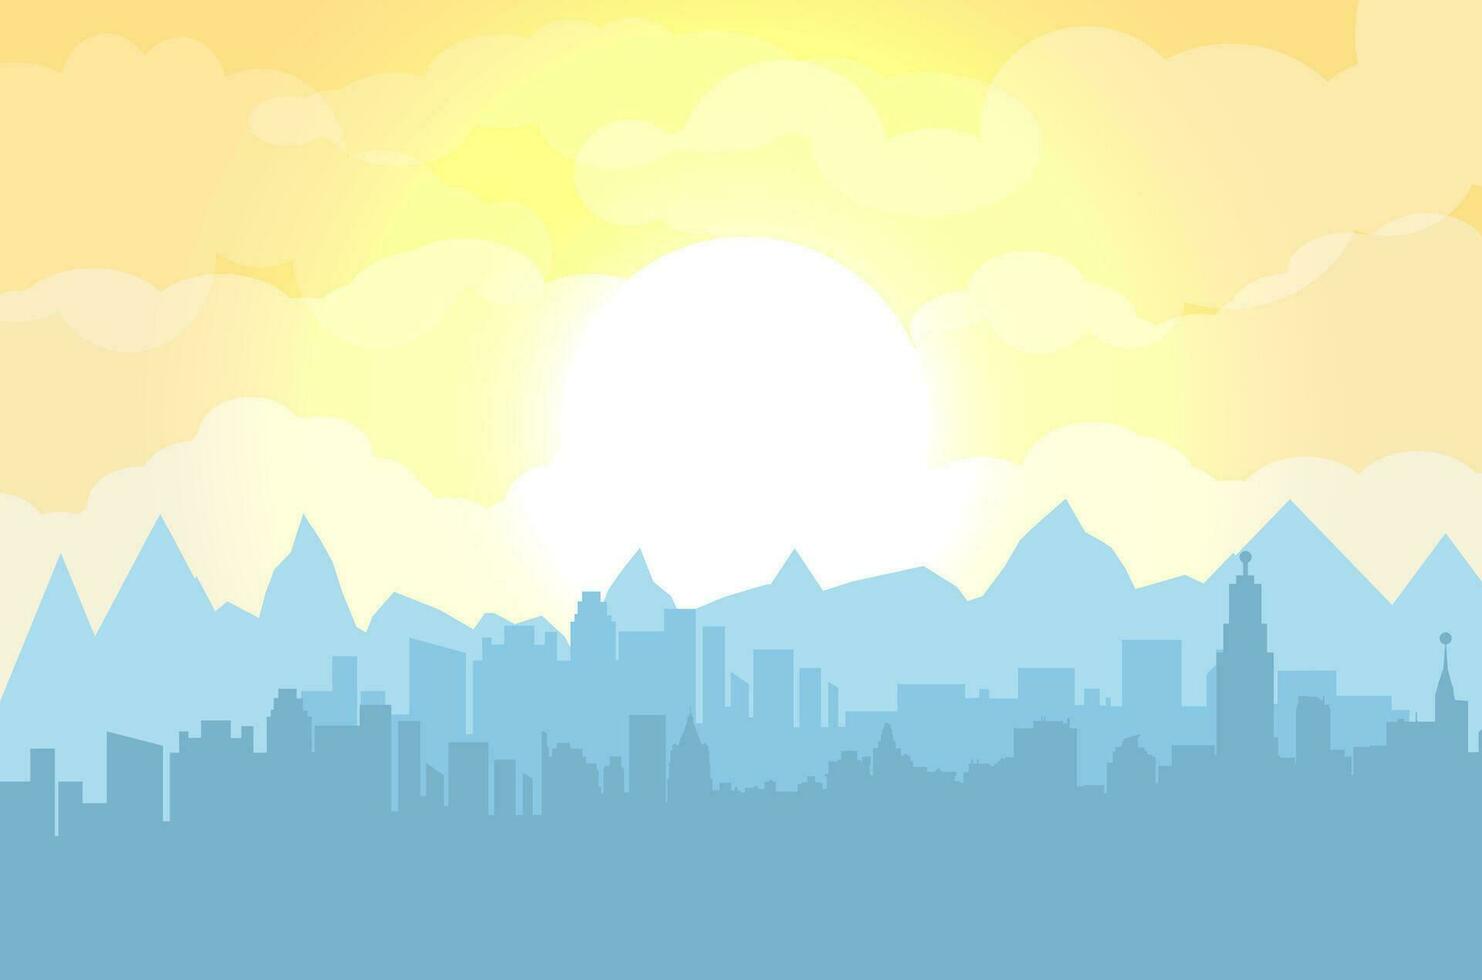 Morning city skyline. Buildings silhouette cityscape with mountains. Big city streets. Fog over city. Yellow sky with sun and clouds. Vector illustration